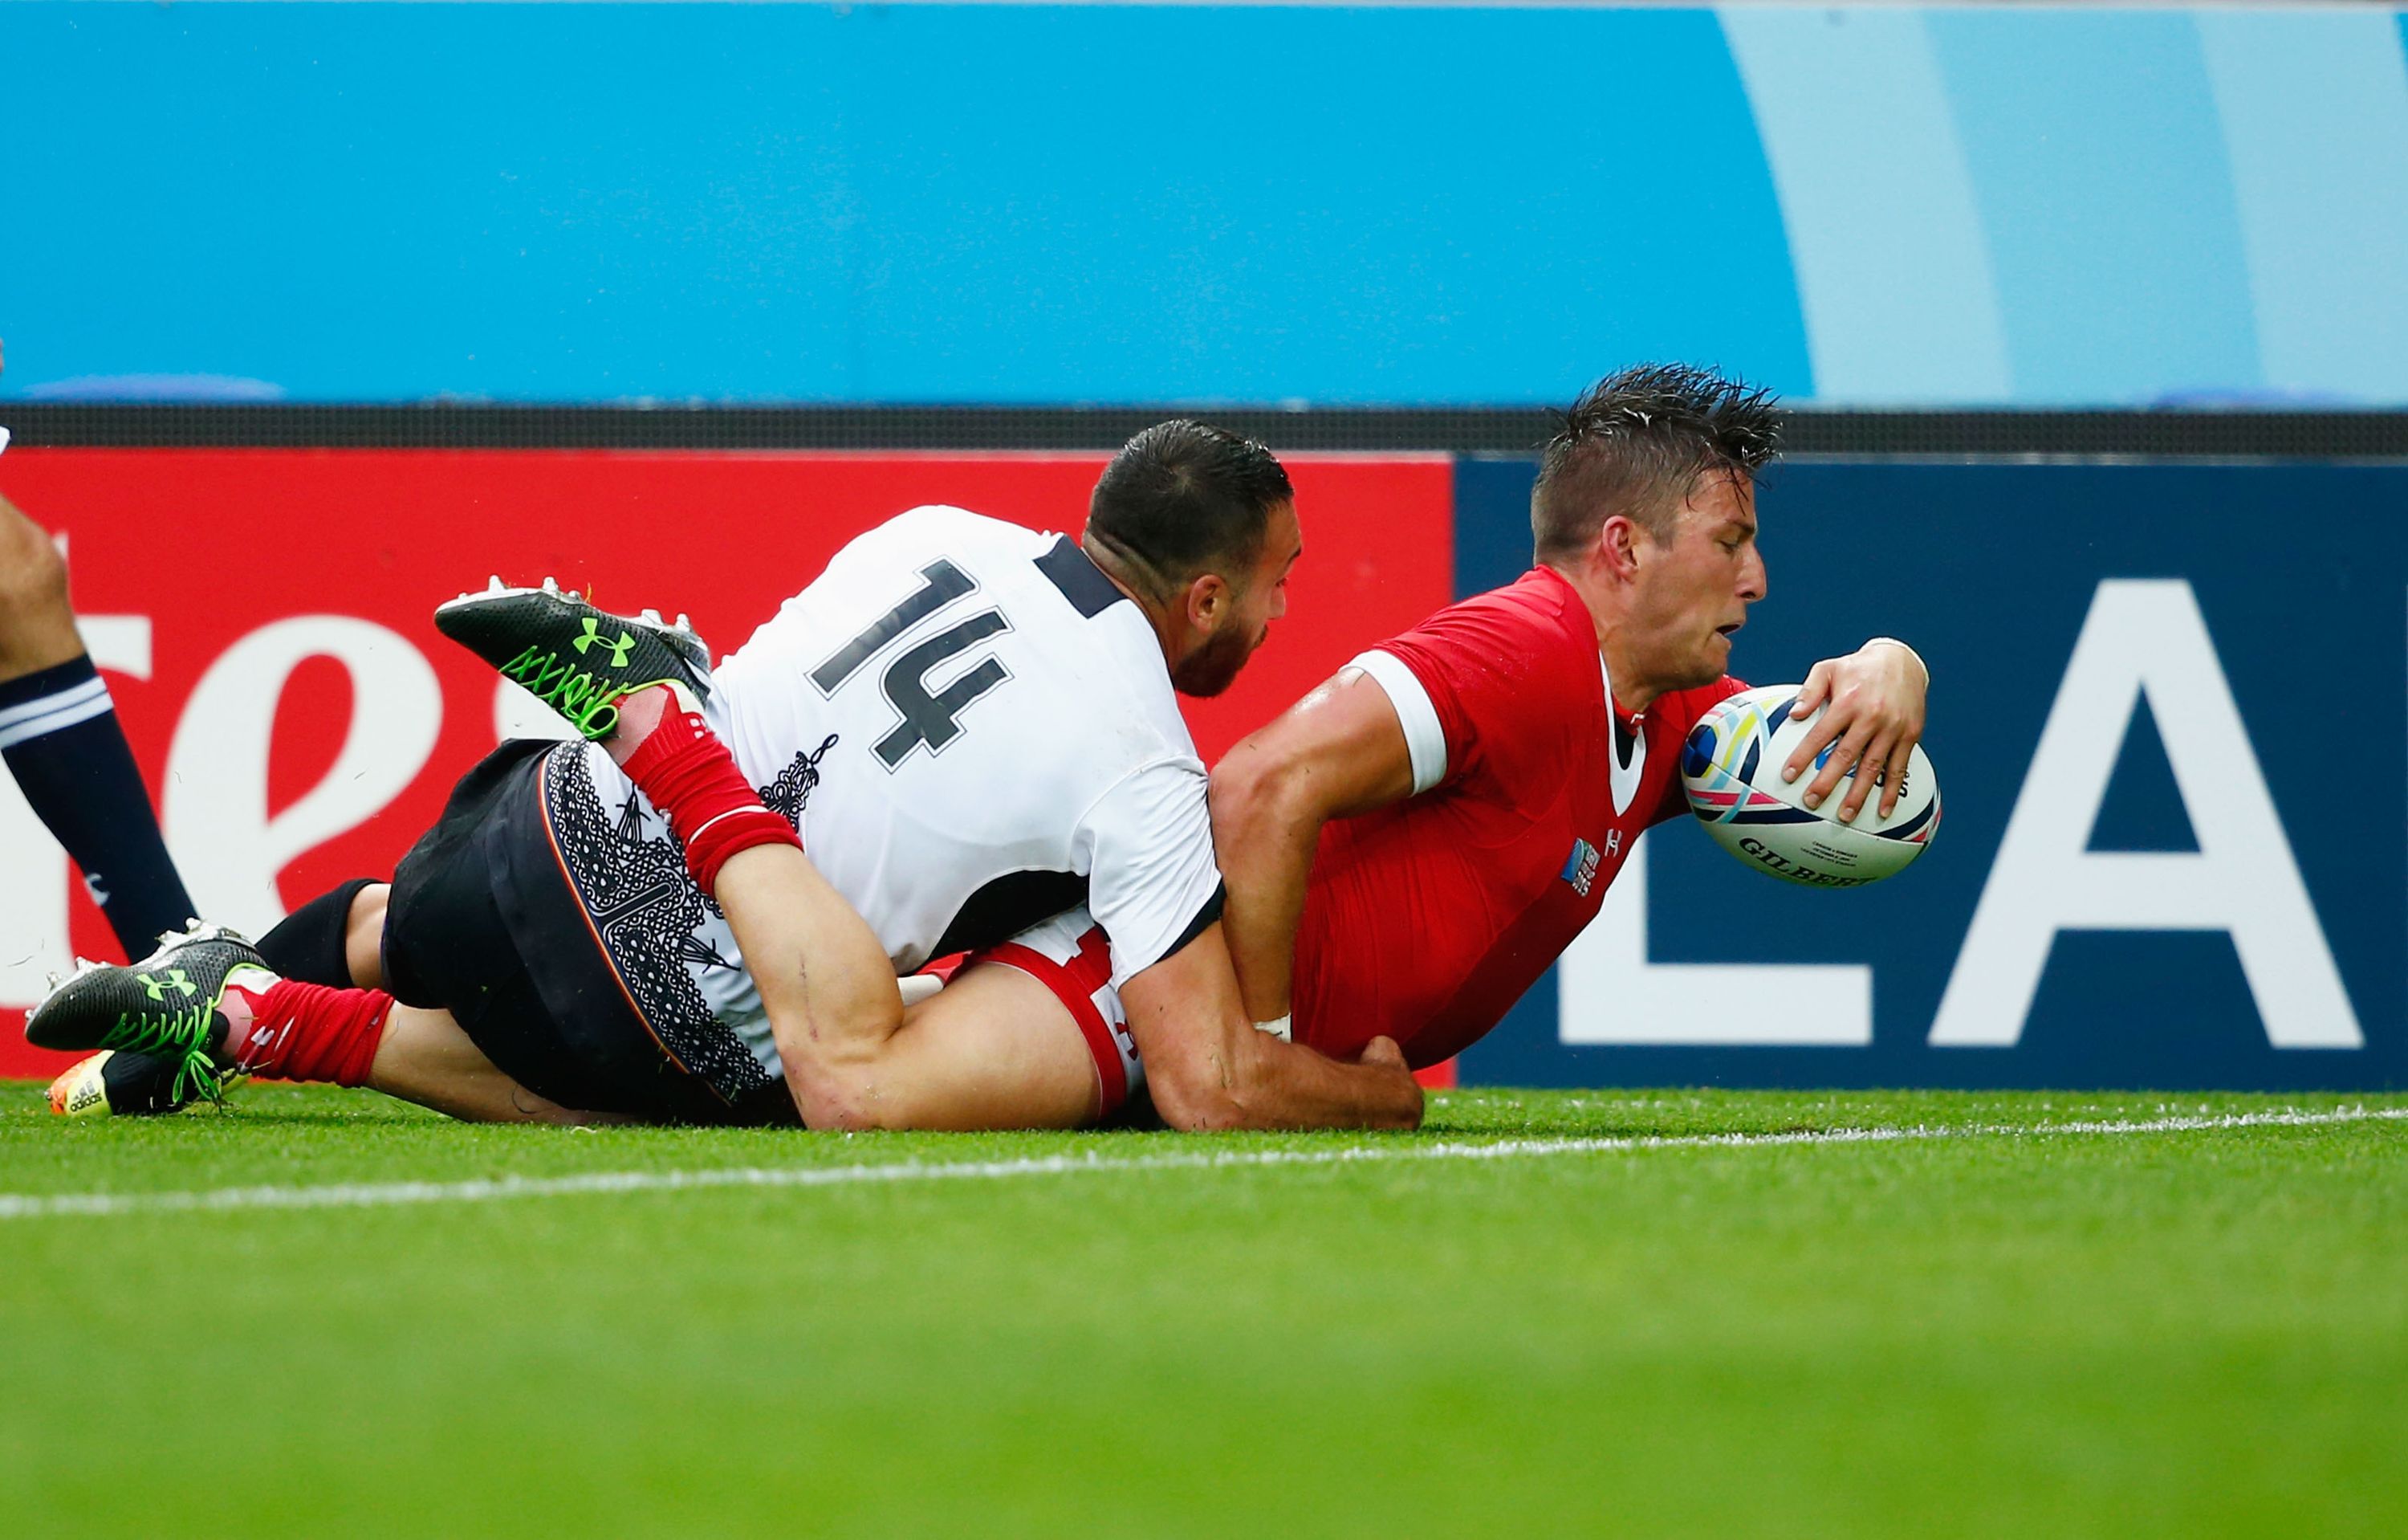 LEICESTER, ENGLAND - OCTOBER 06:  DTH Van Der Merwe of Canada beats Madalin Lemnaru of Romania to score their first try during the 2015 Rugby World Cup Pool D match between Canada and Romania at Leicester City Stadium on October 6, 2015 in Leicester, United Kingdom.  (Photo by Laurence Griffiths/Getty Images)